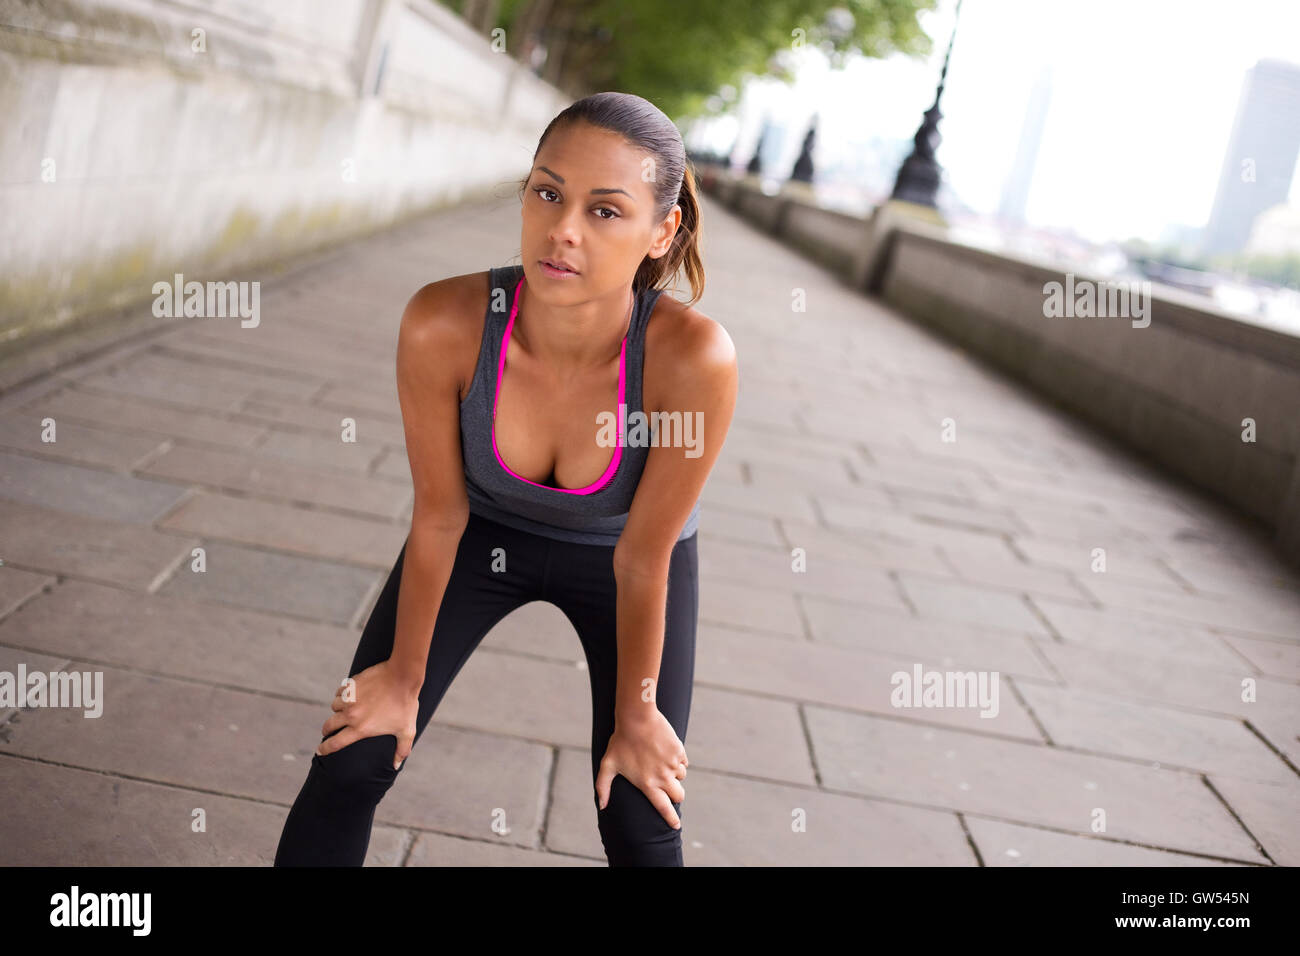 Runner leaning over to catch her breath Stock Photo